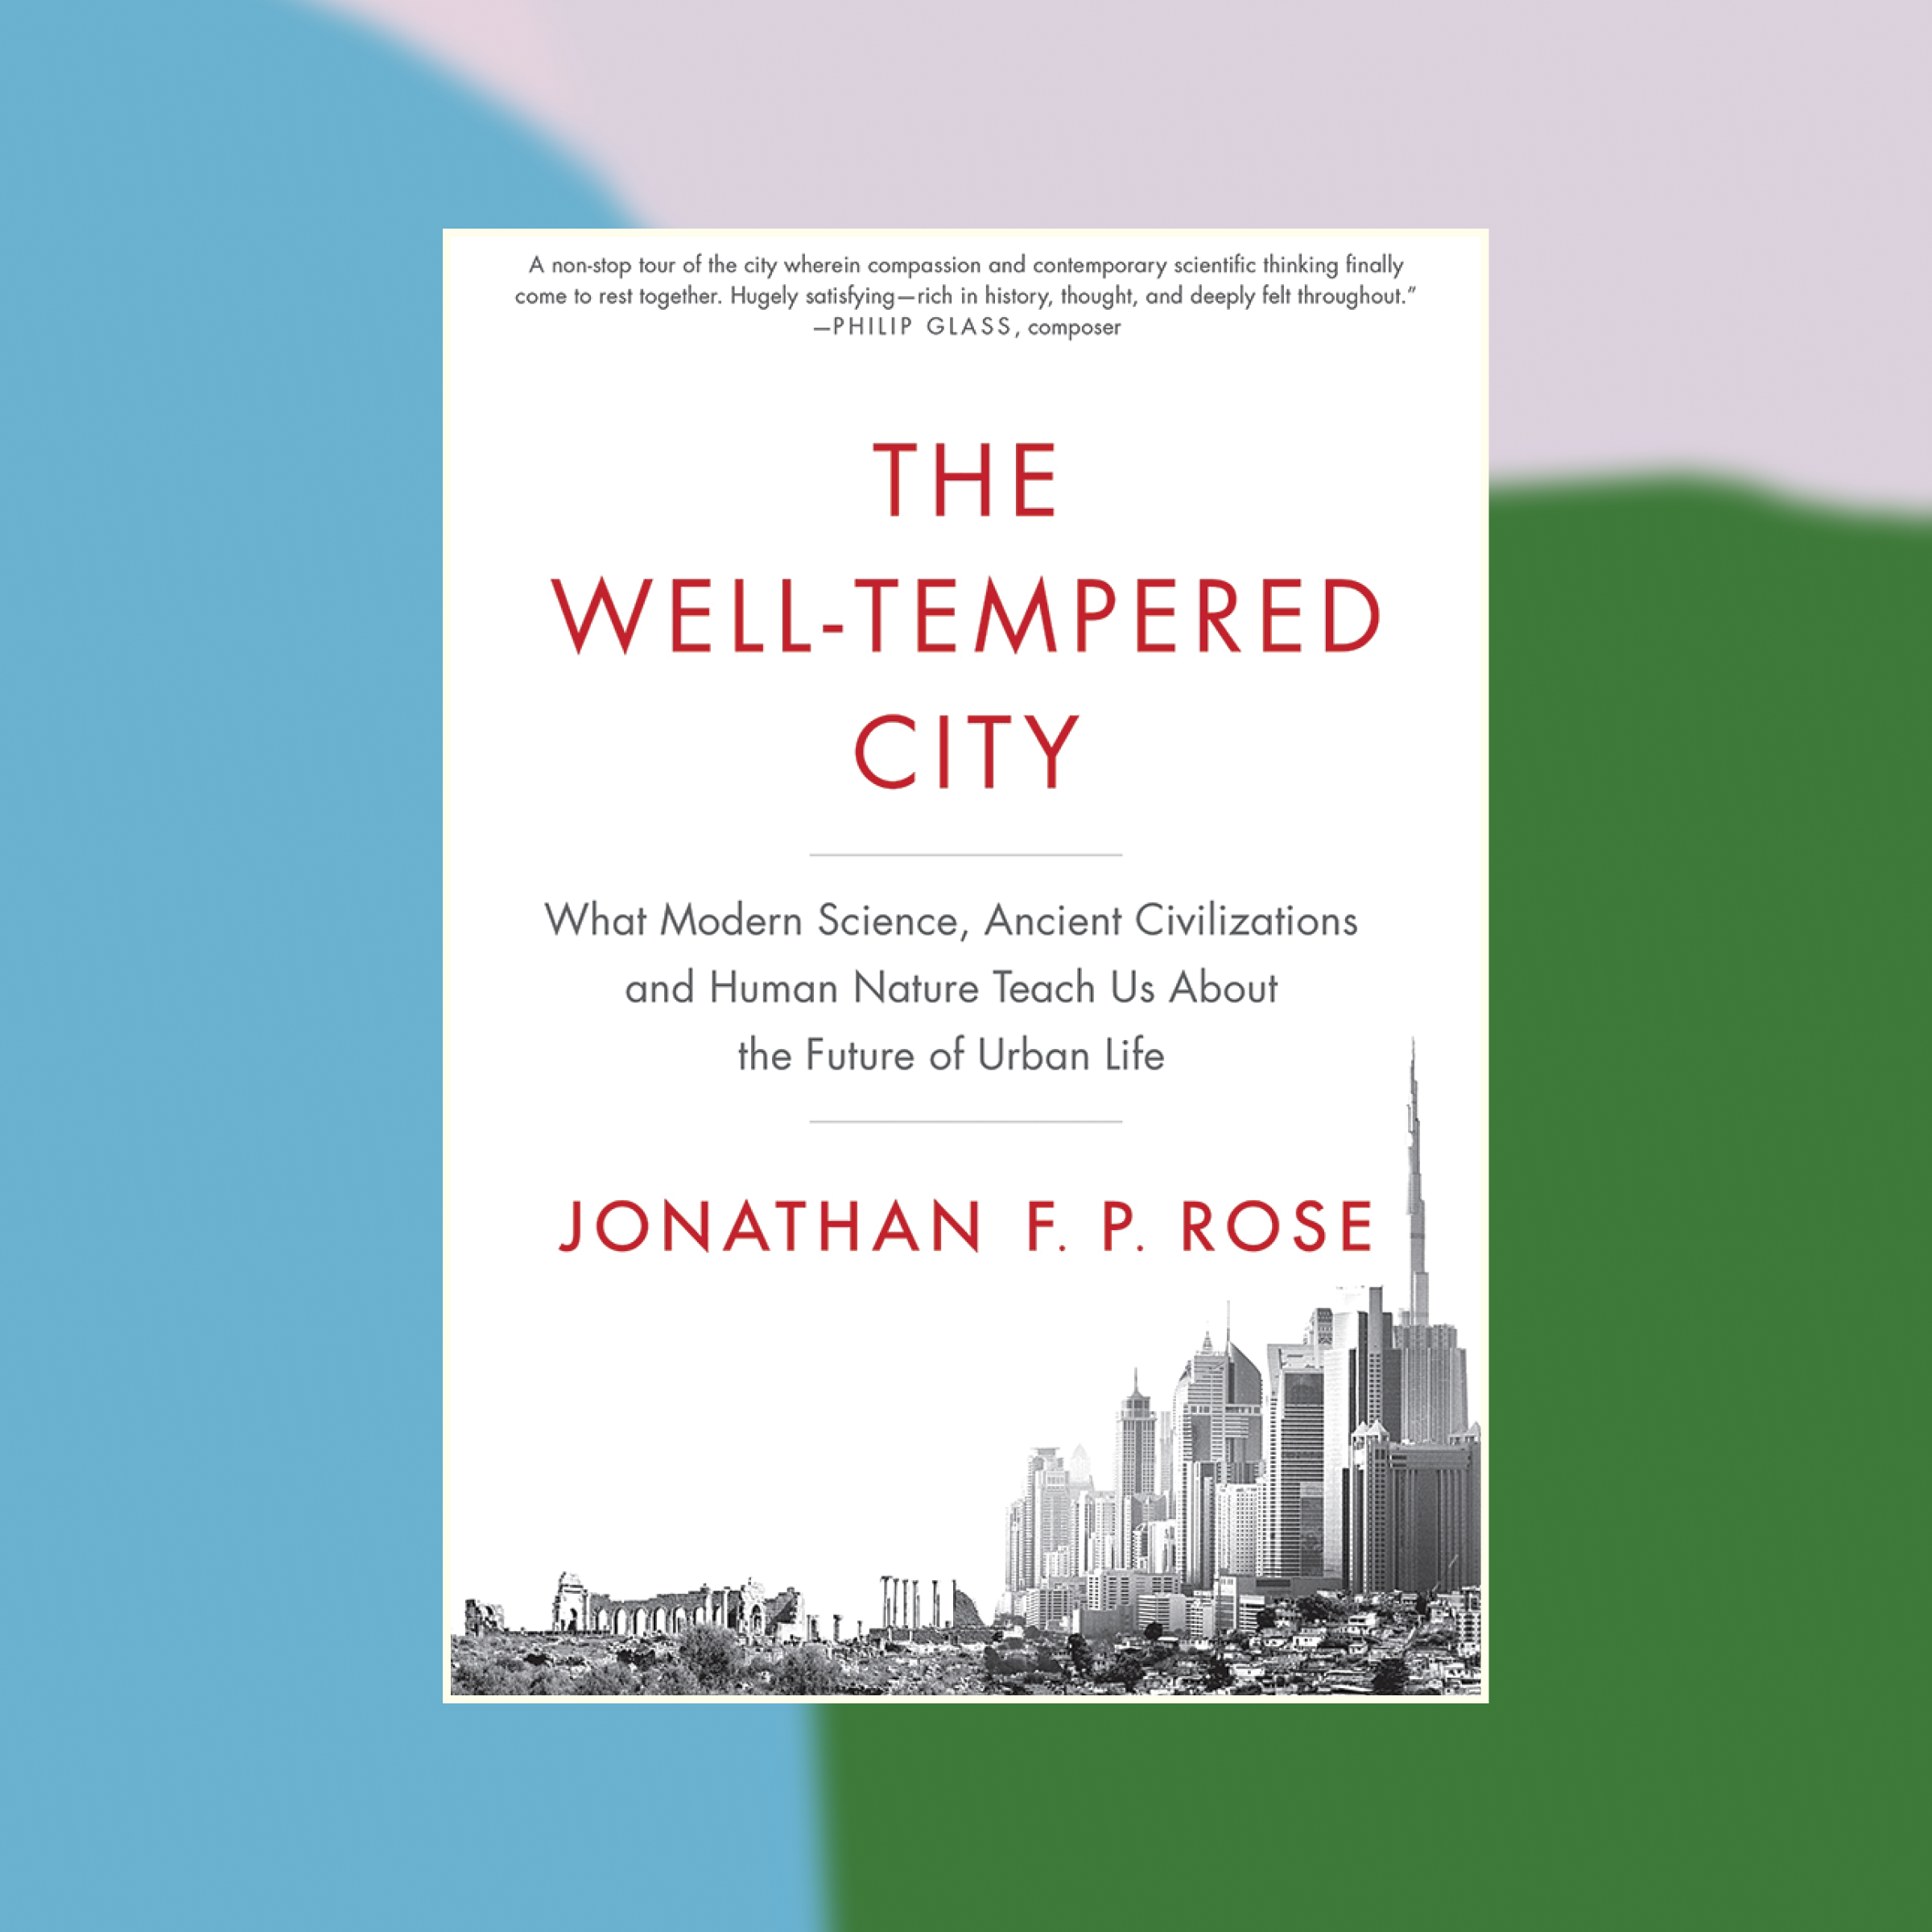 Book cover of The Well-Tempered City against an abstract painted background